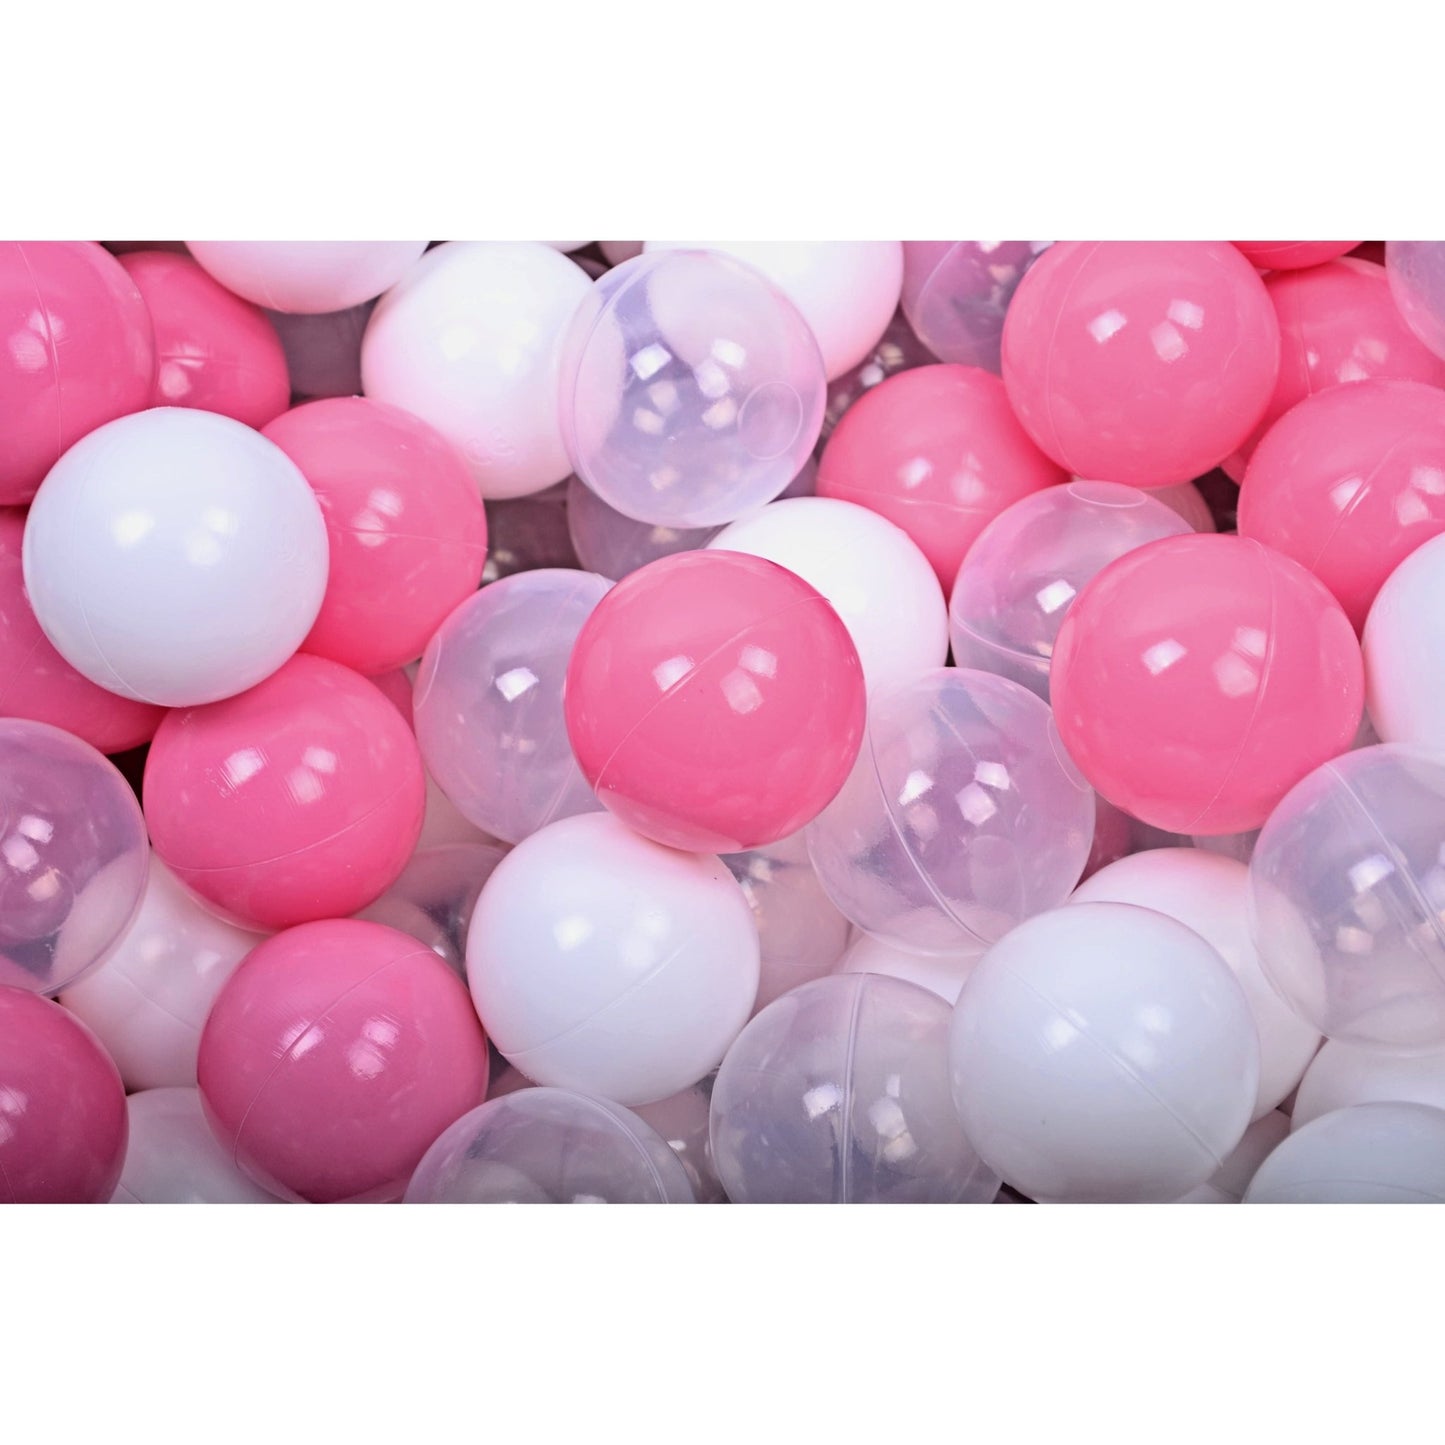 Fluffy Pink Boucle Round Foam Ball Pit - Select Your Own Balls